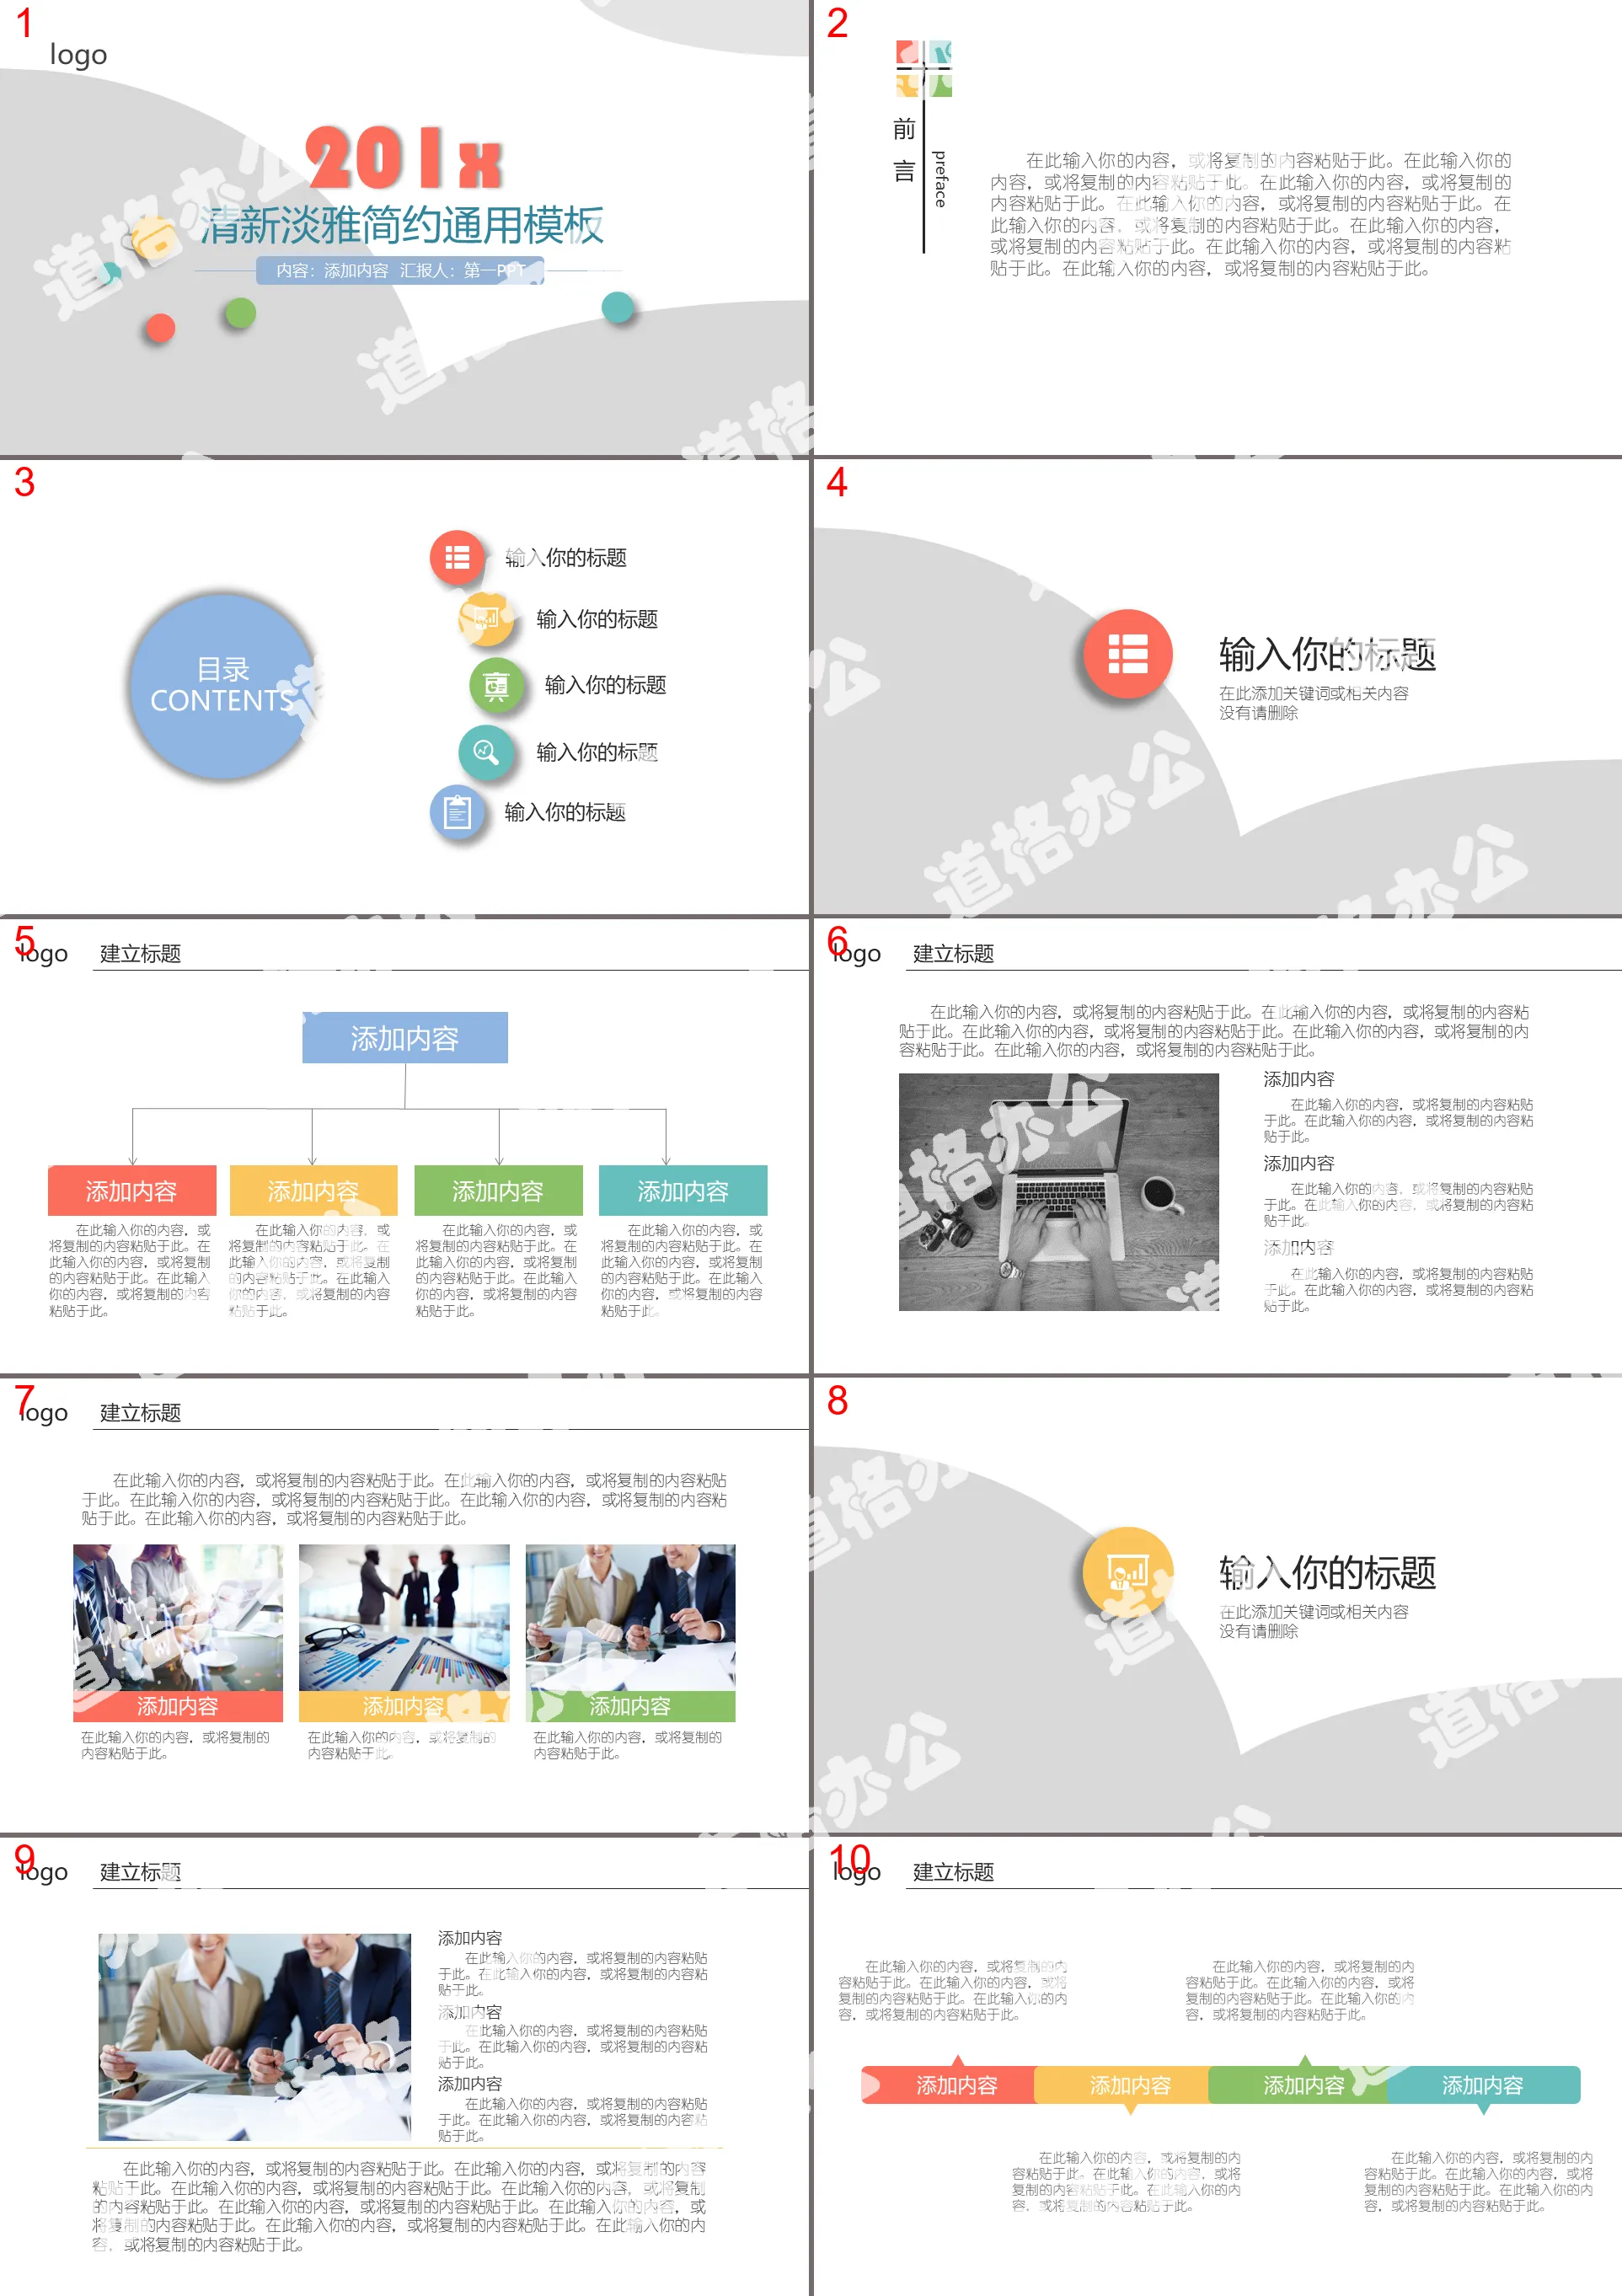 Universal fashion PPT template in color minimalist style